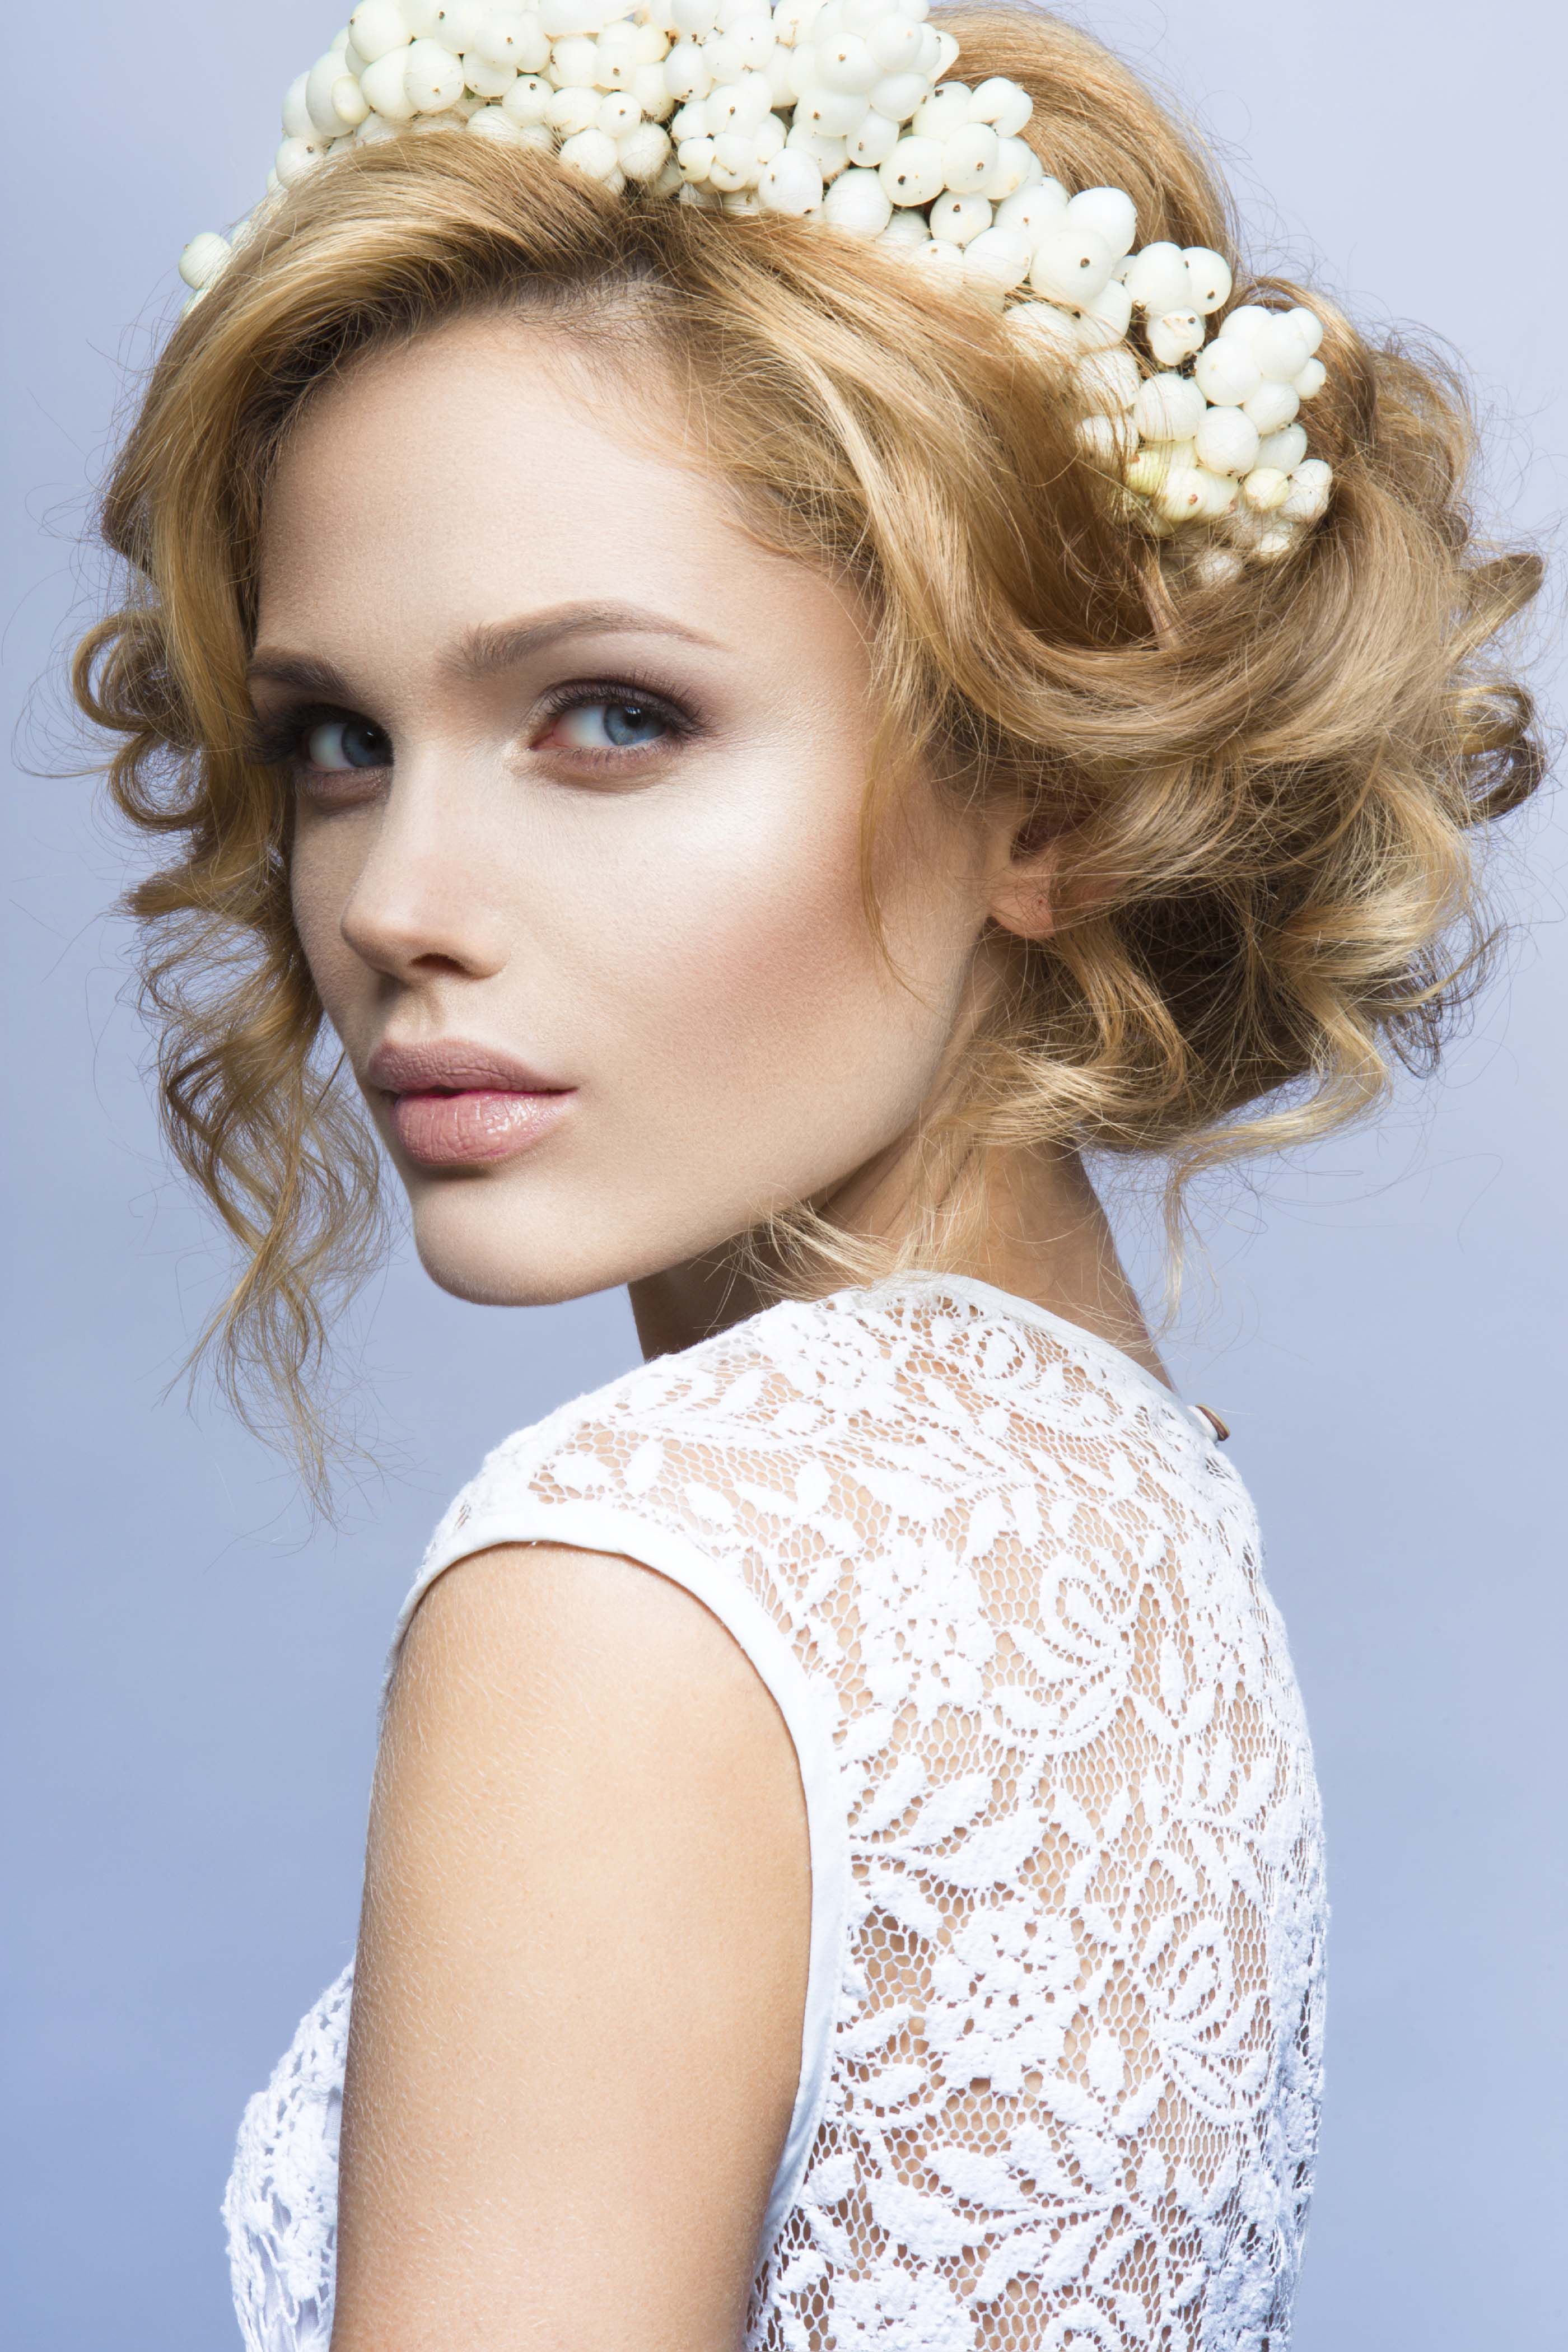 Stunning Bridesmaid Hairstyles Perfect For Summer Weddings (View 7 of 20)